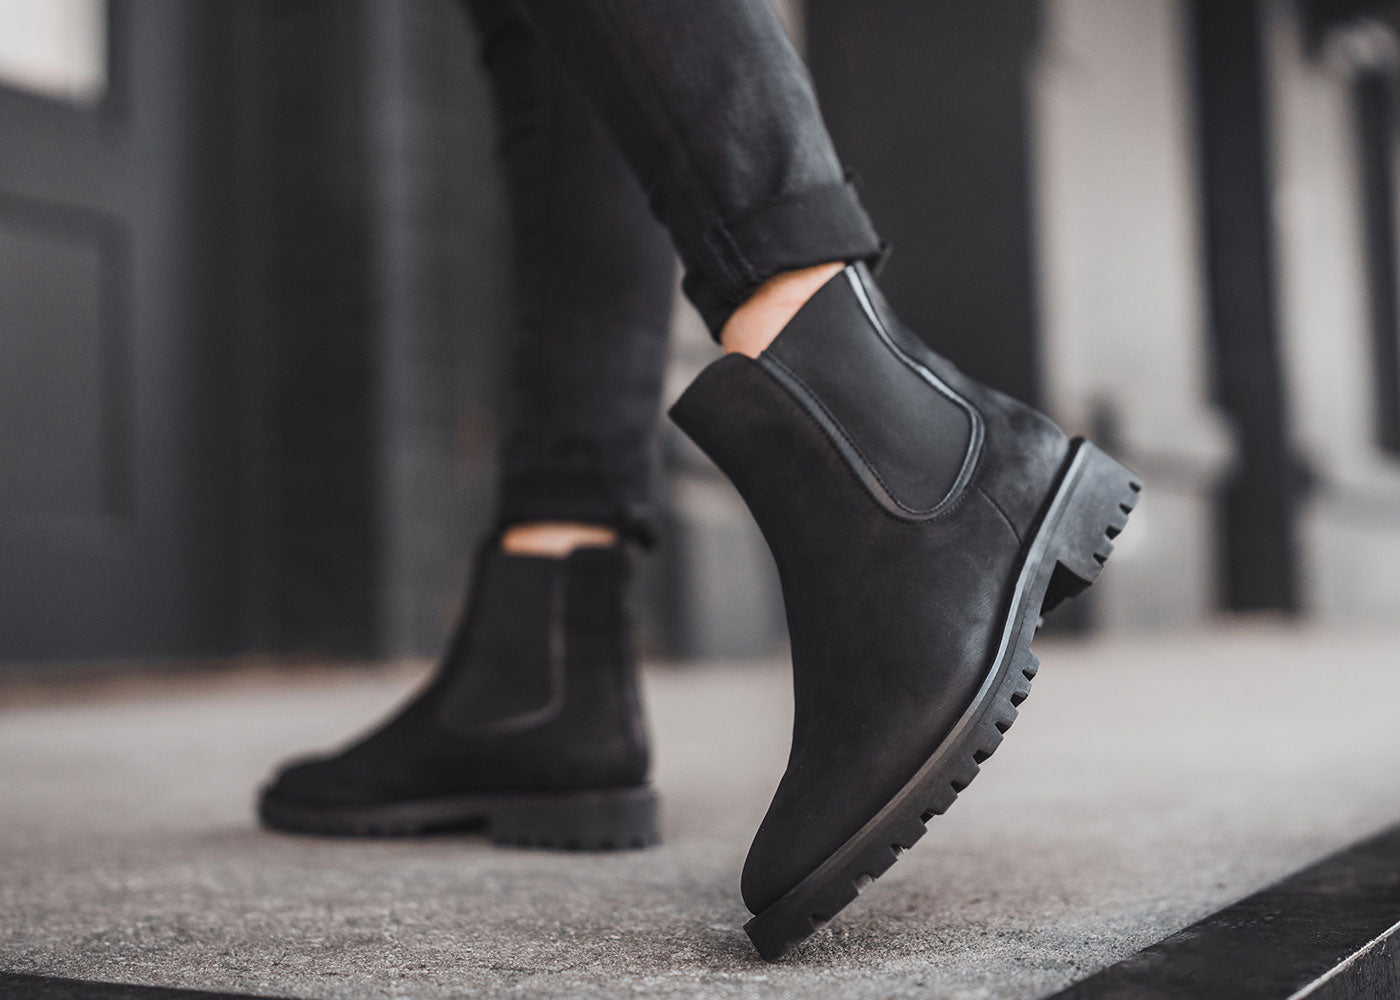 Thursday Boot Company - What's a high without a low? Meet the New